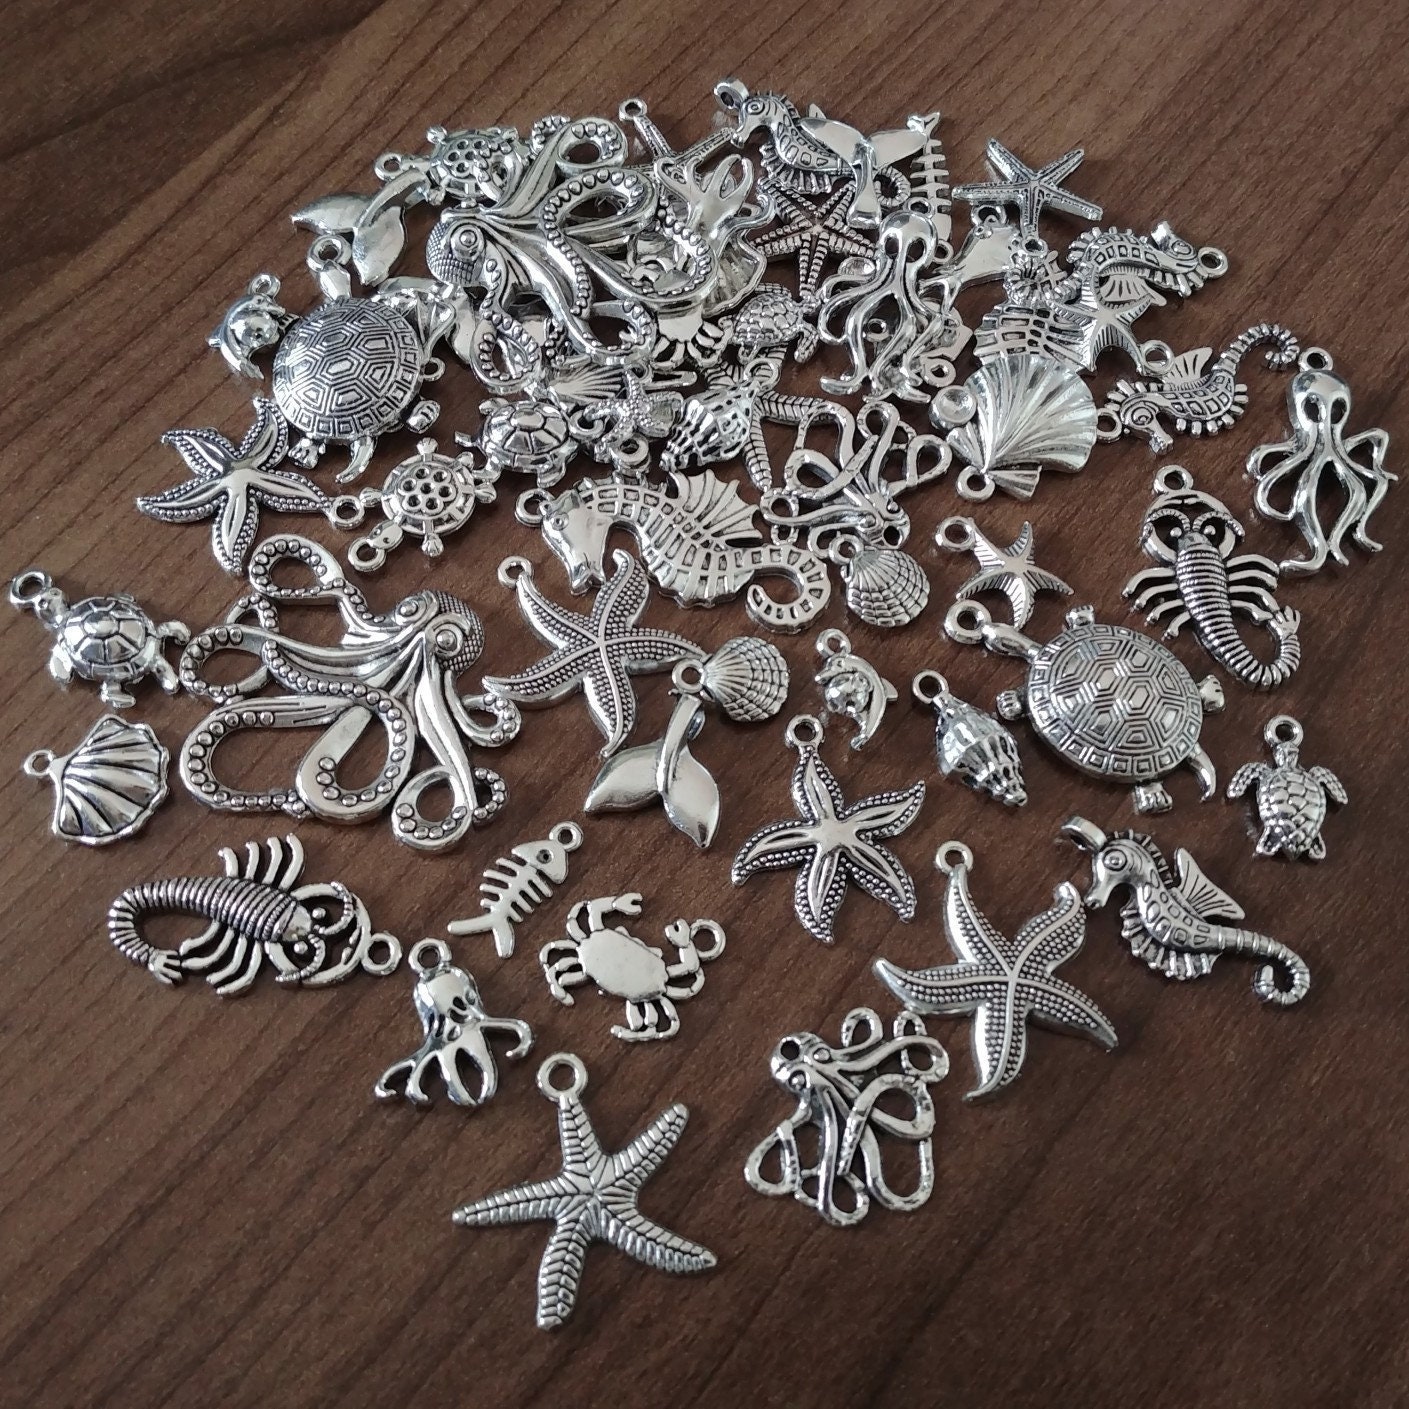 Liquidation Bulk Charms Lot, Pendant Charm Mix, Assorted Charms or